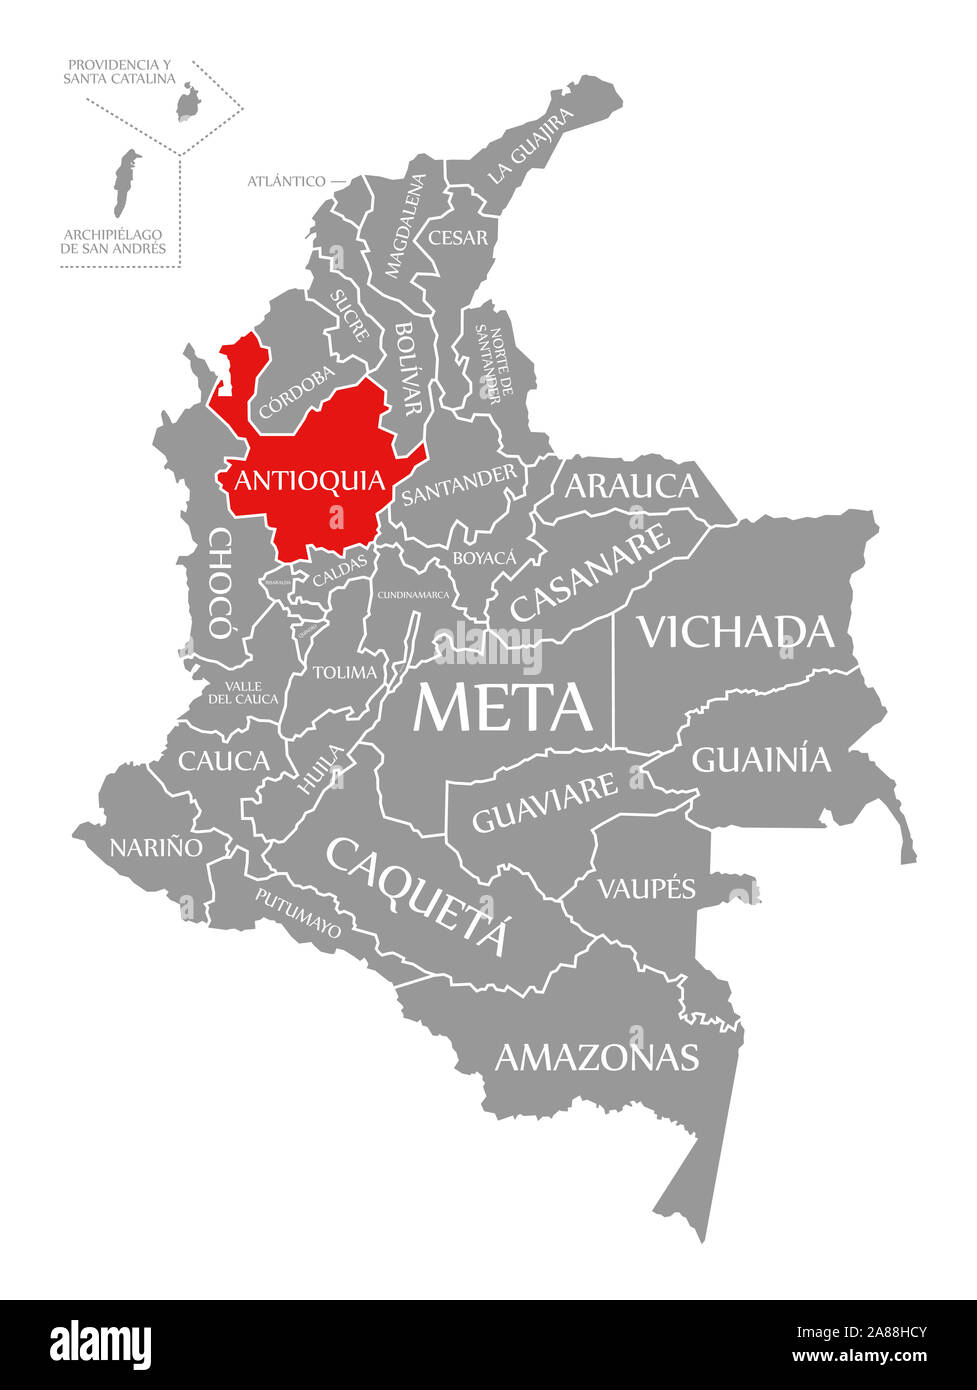 Antioquia red highlighted in map of Colombia Stock Photo